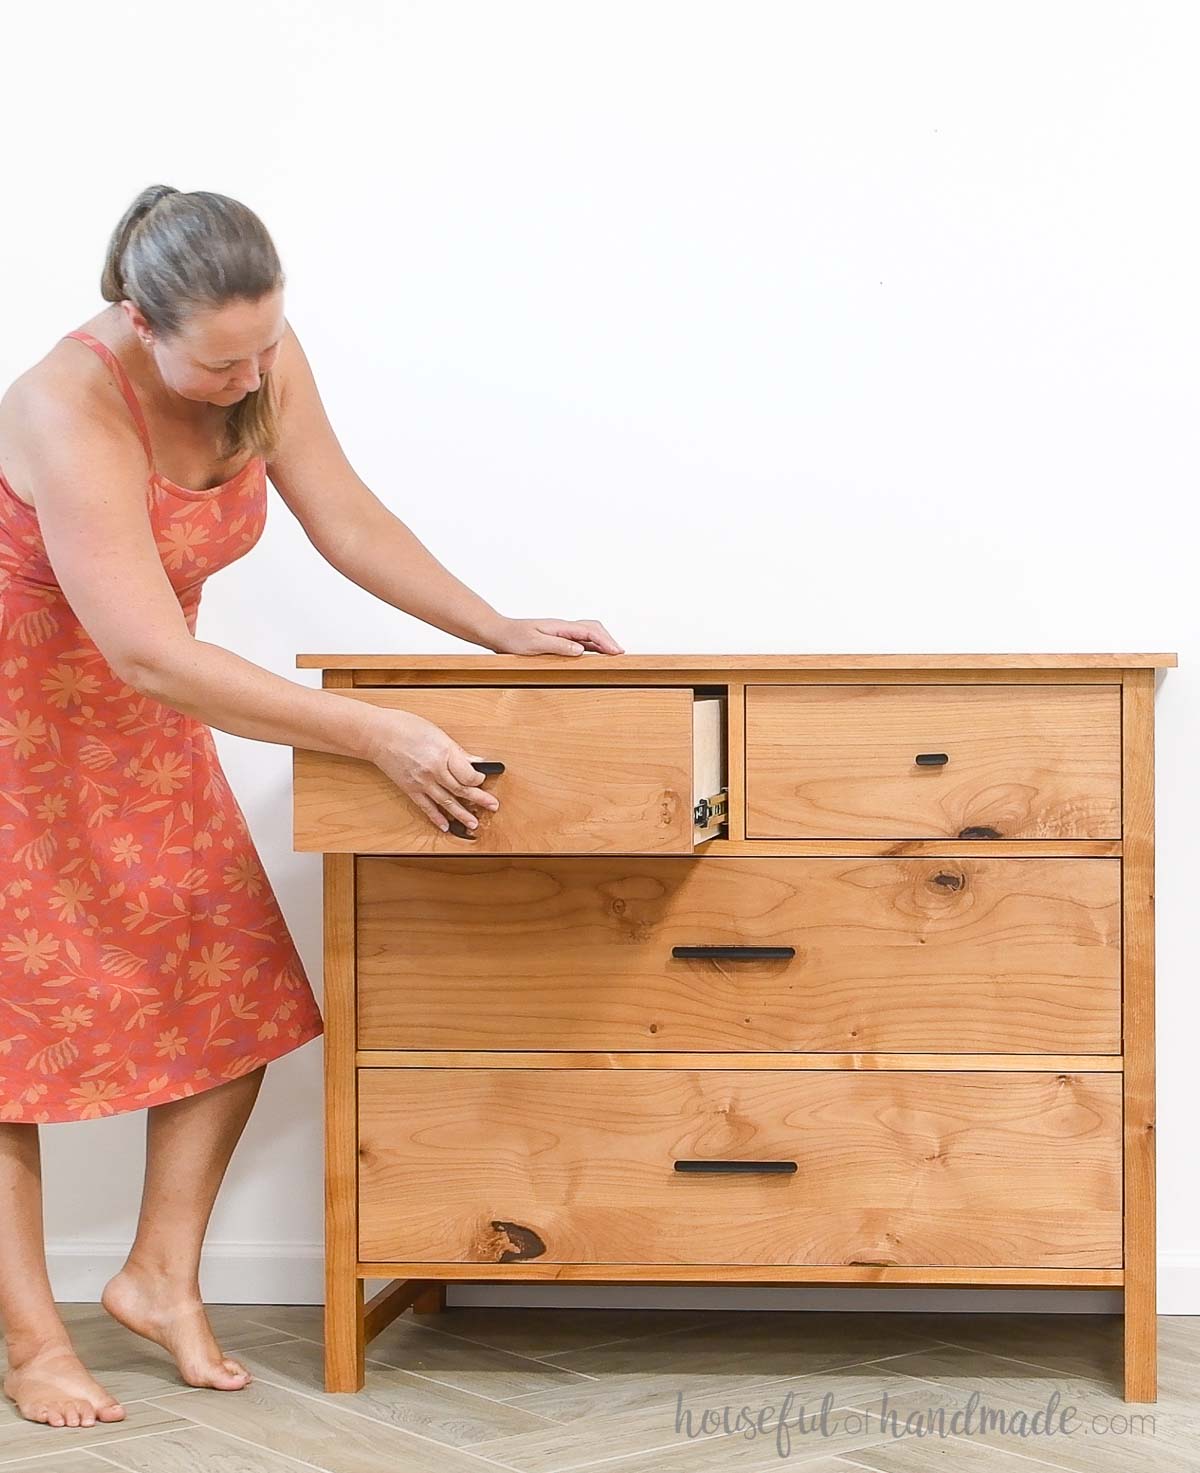 Kati opening one of the top drawers of the DIY 4 drawer dresser.